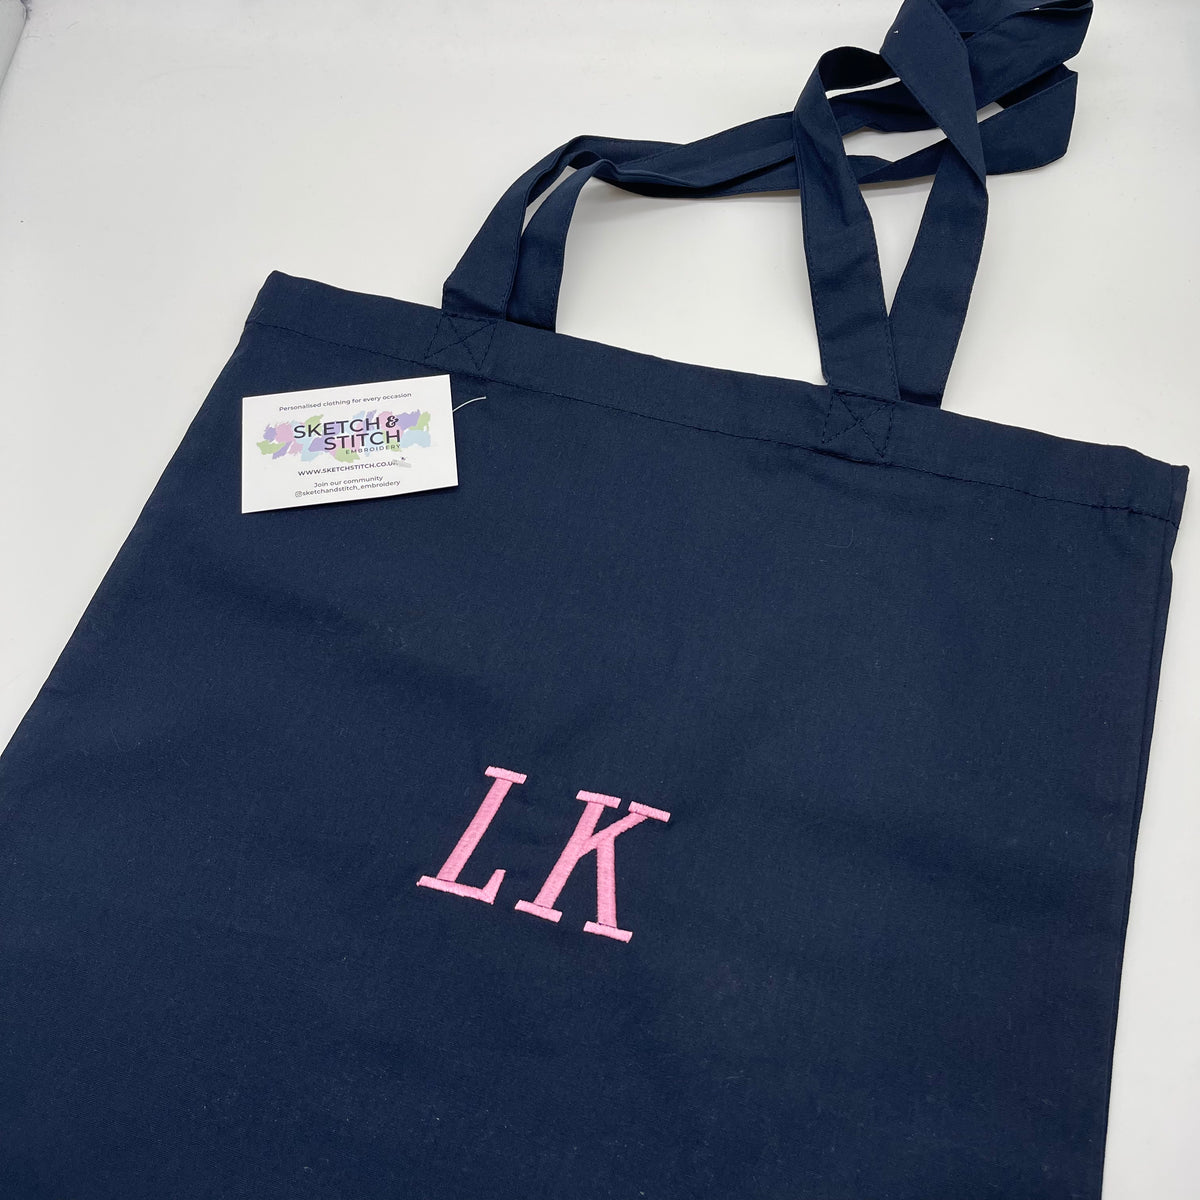 Tote bag personalised text